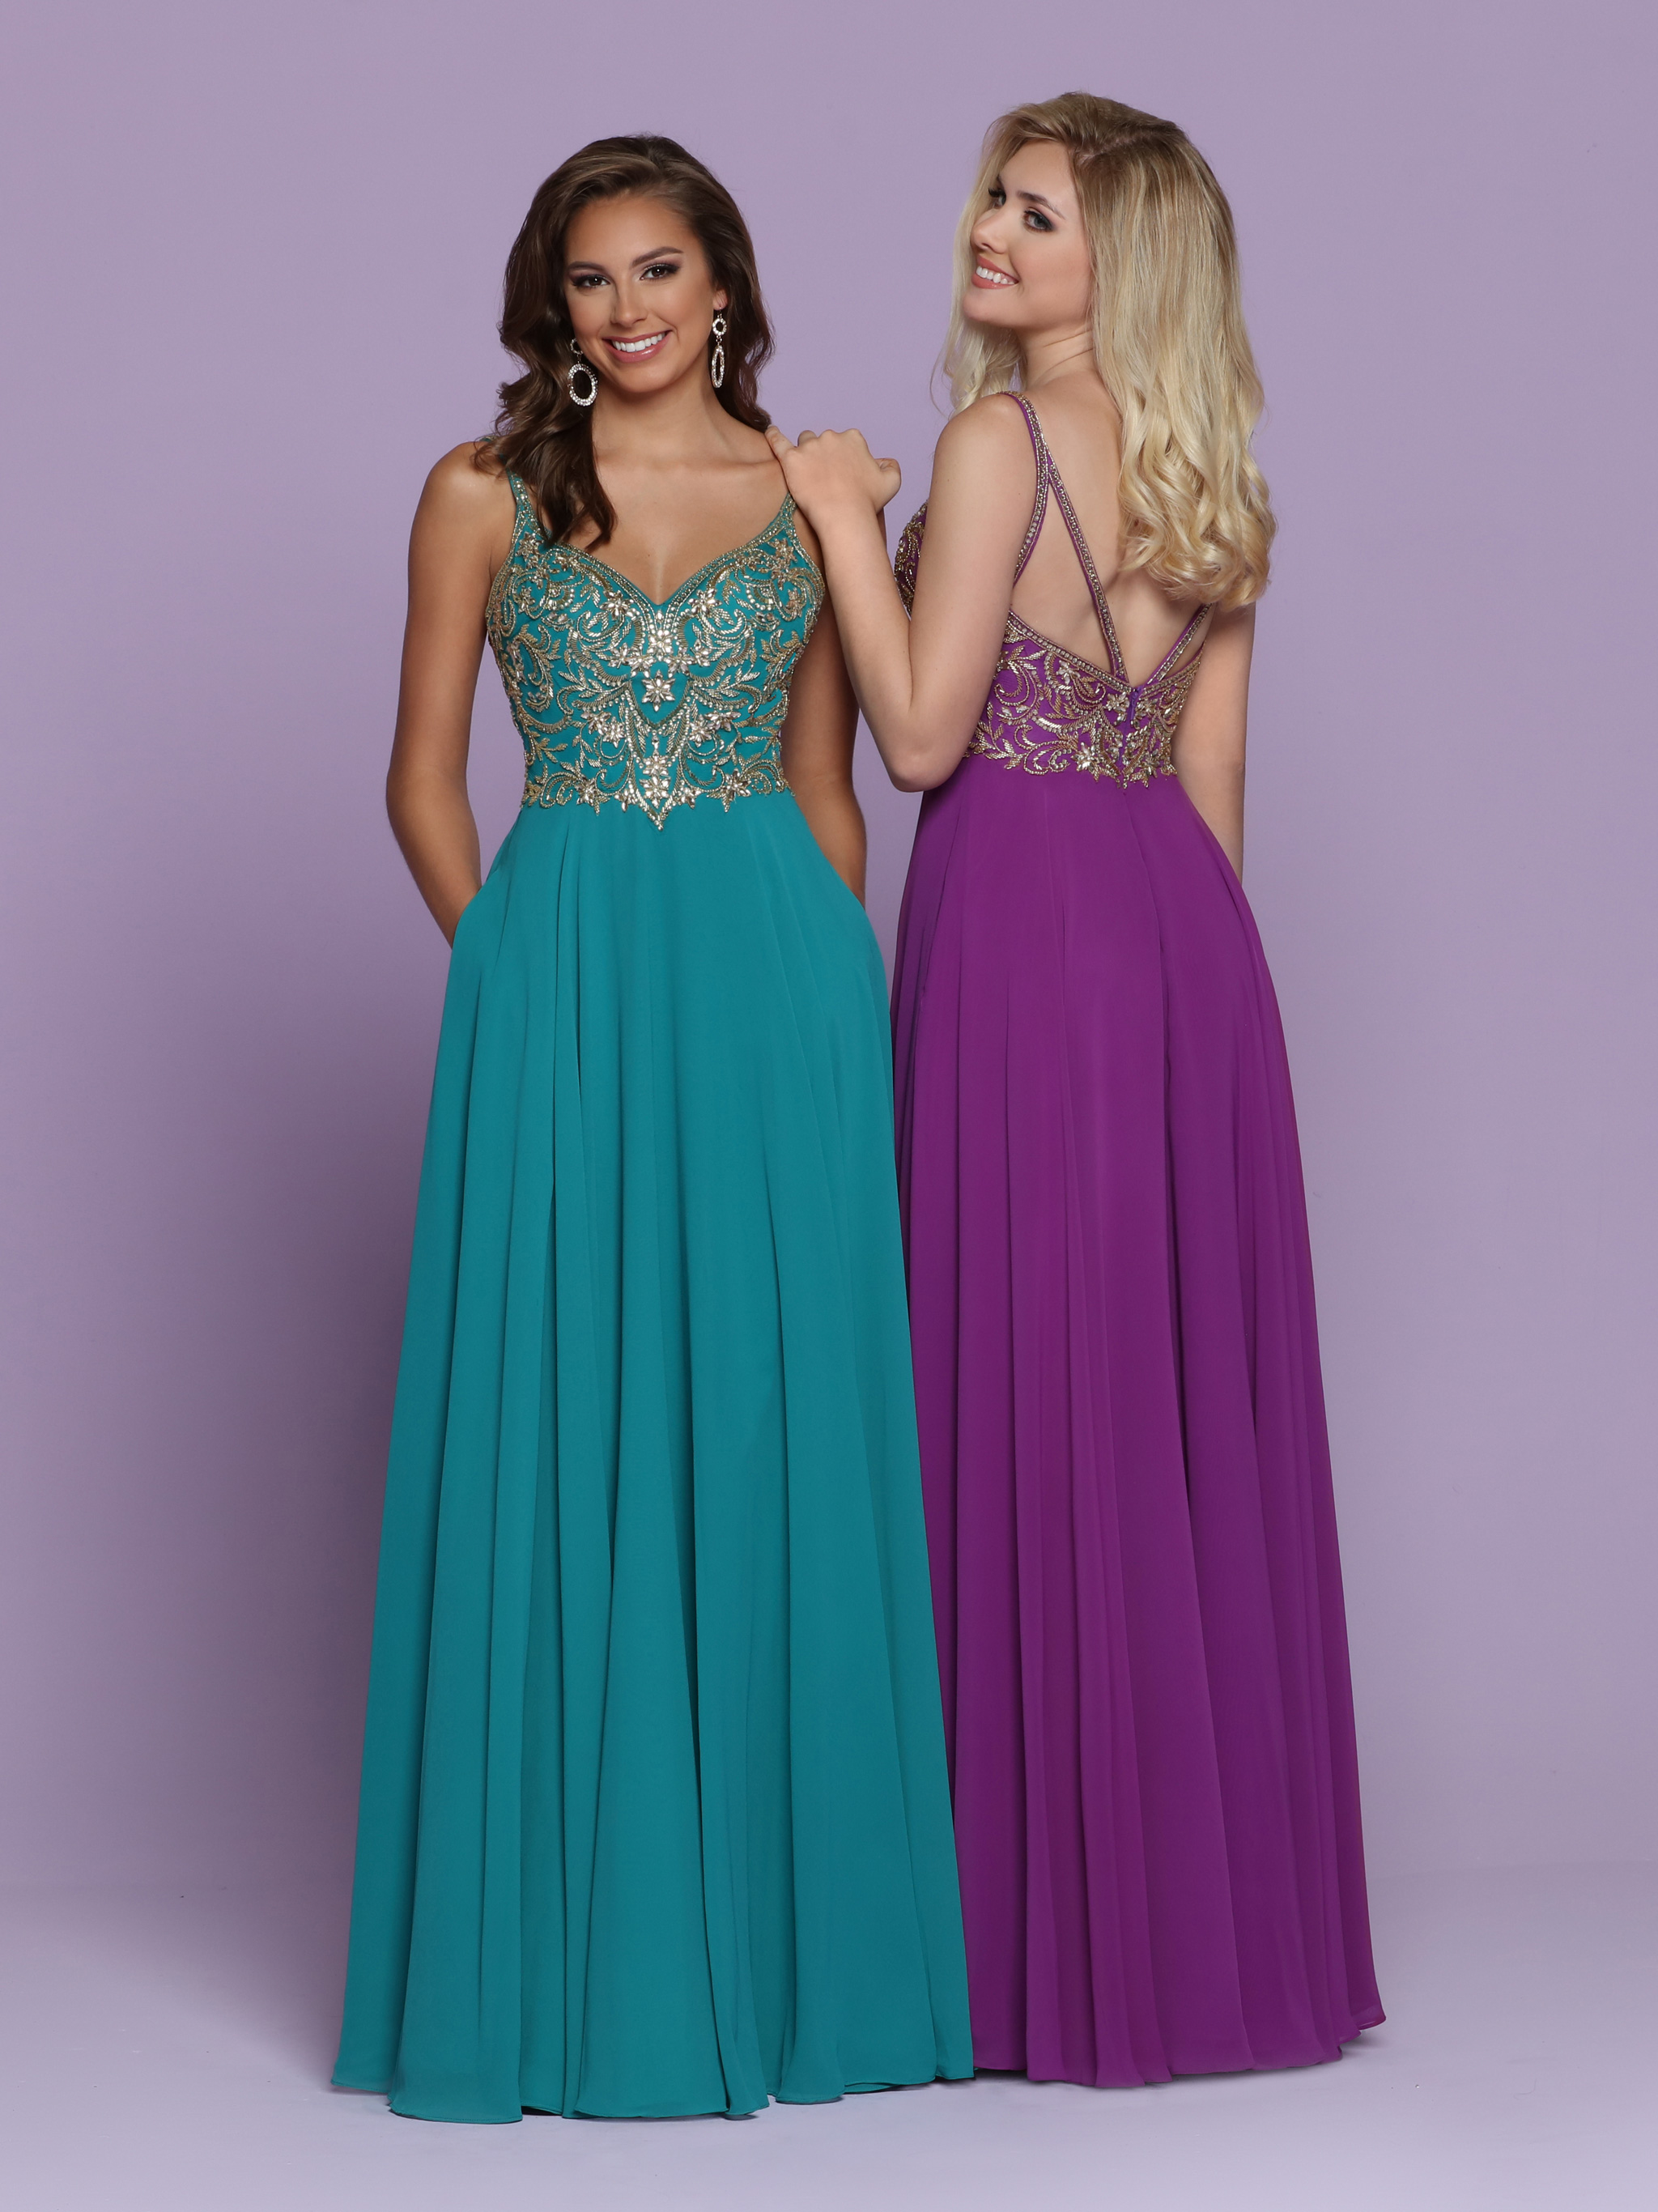 Chiffon Prom & Homecoming Dresses for 2020 – Sparkle Prom